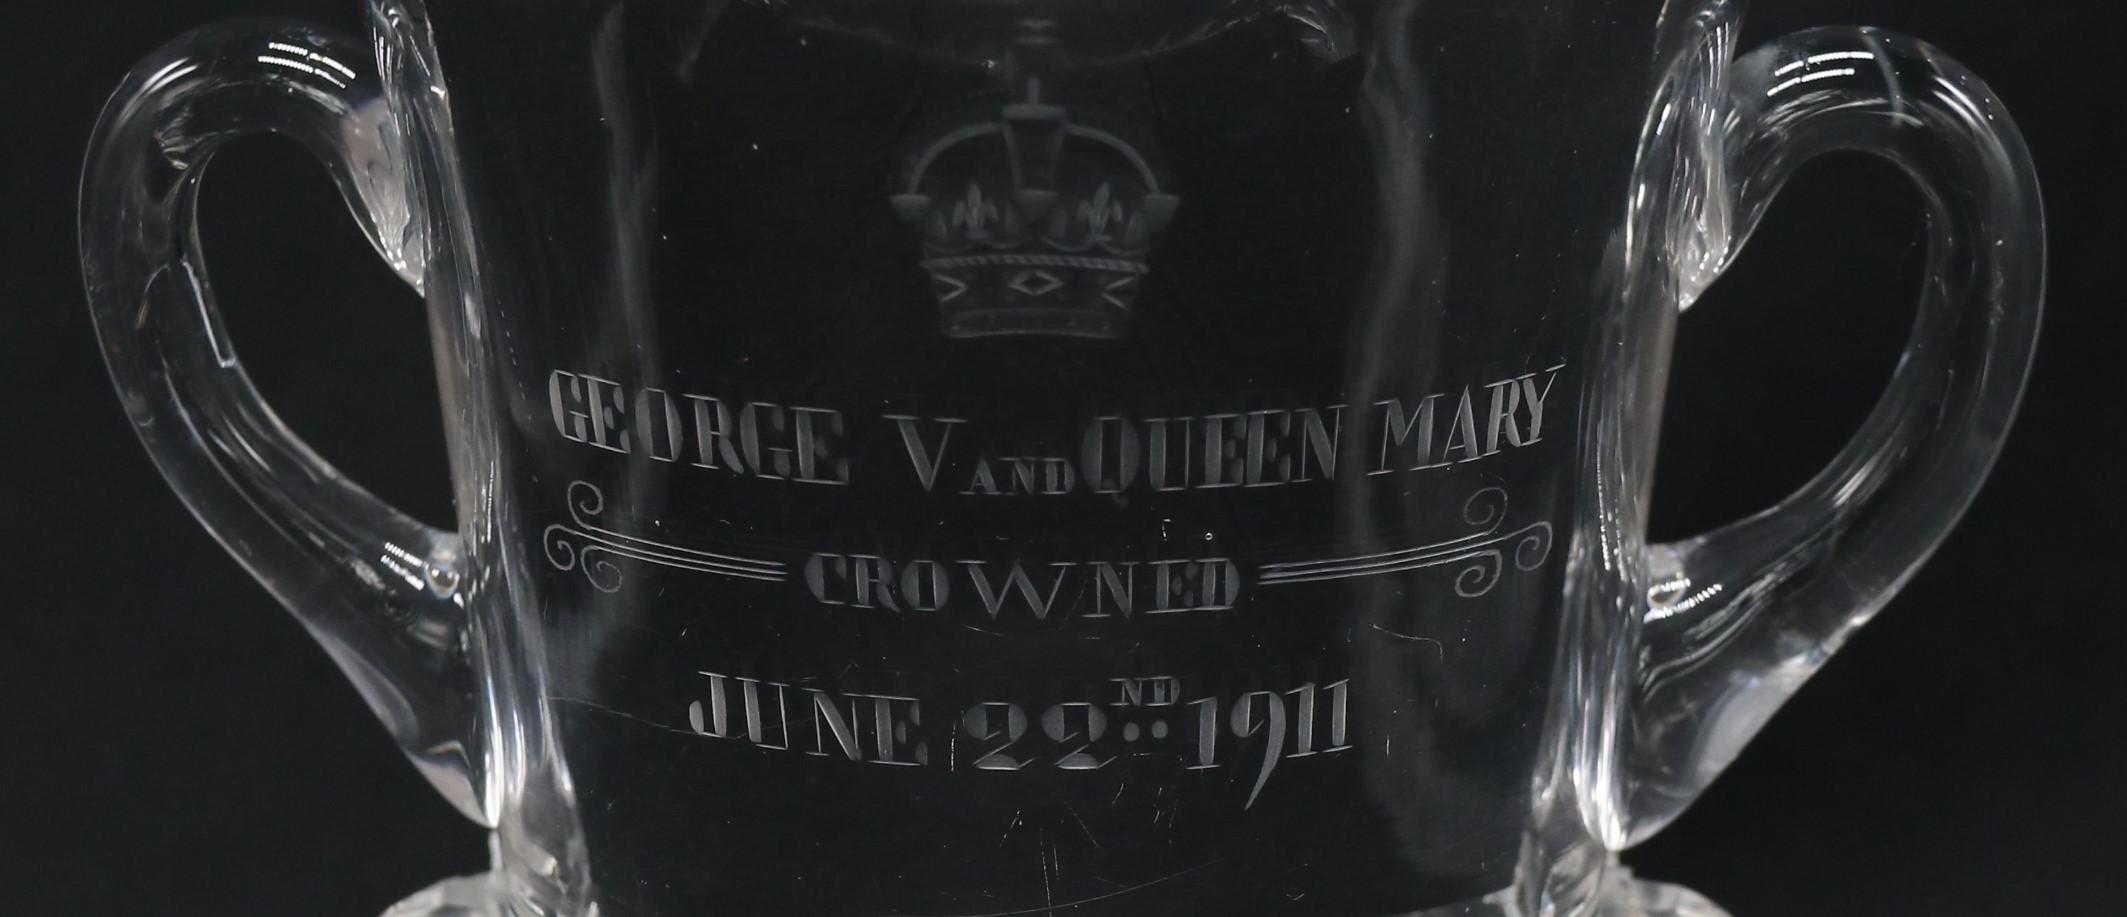   English Commemorative Glass Goblet for the Coronation of George v 1911 For Sale 6